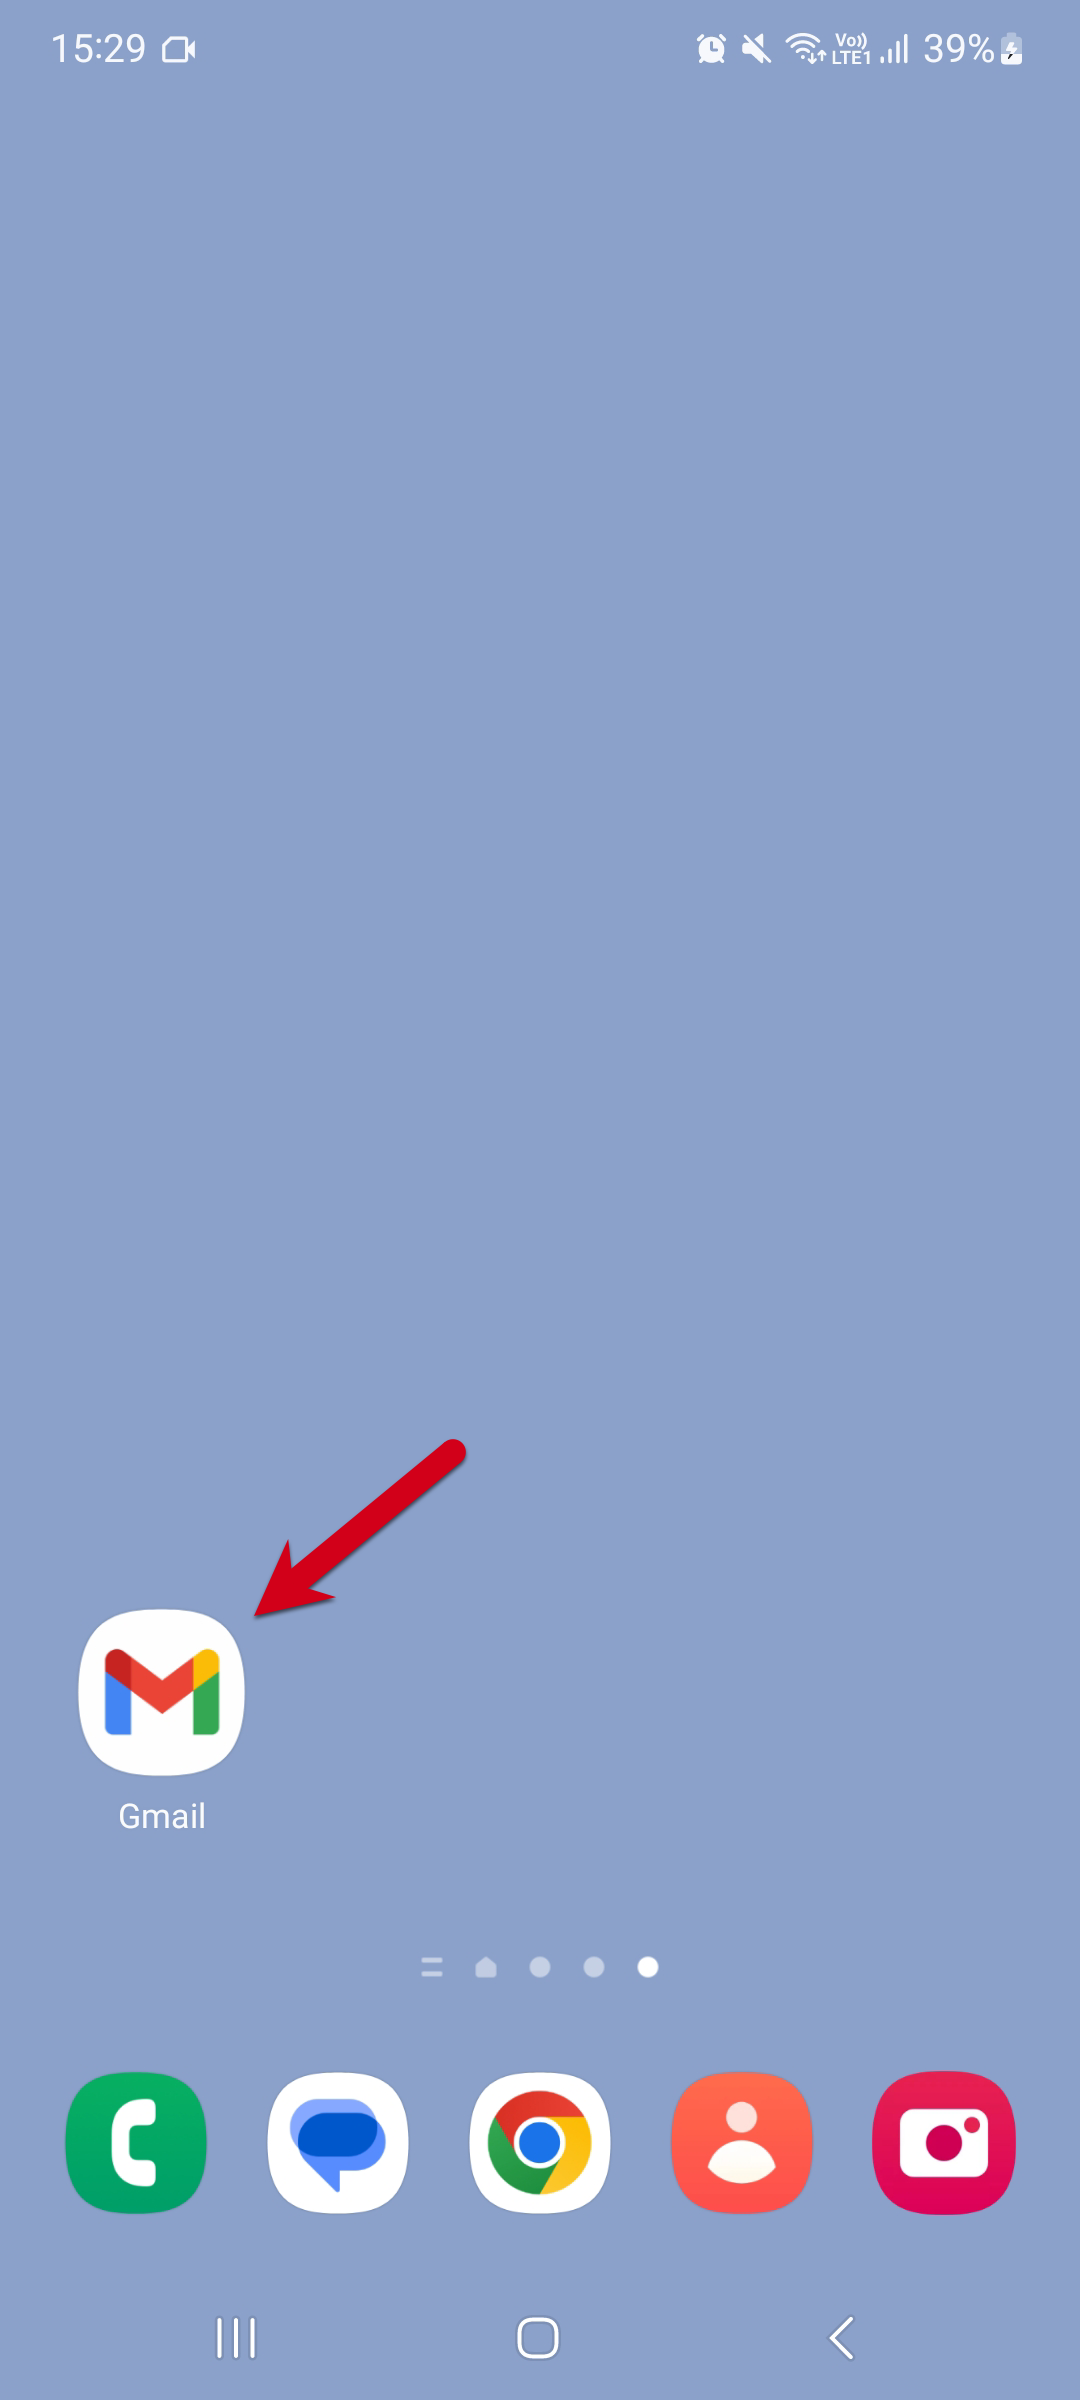 Android Gmail step 1a